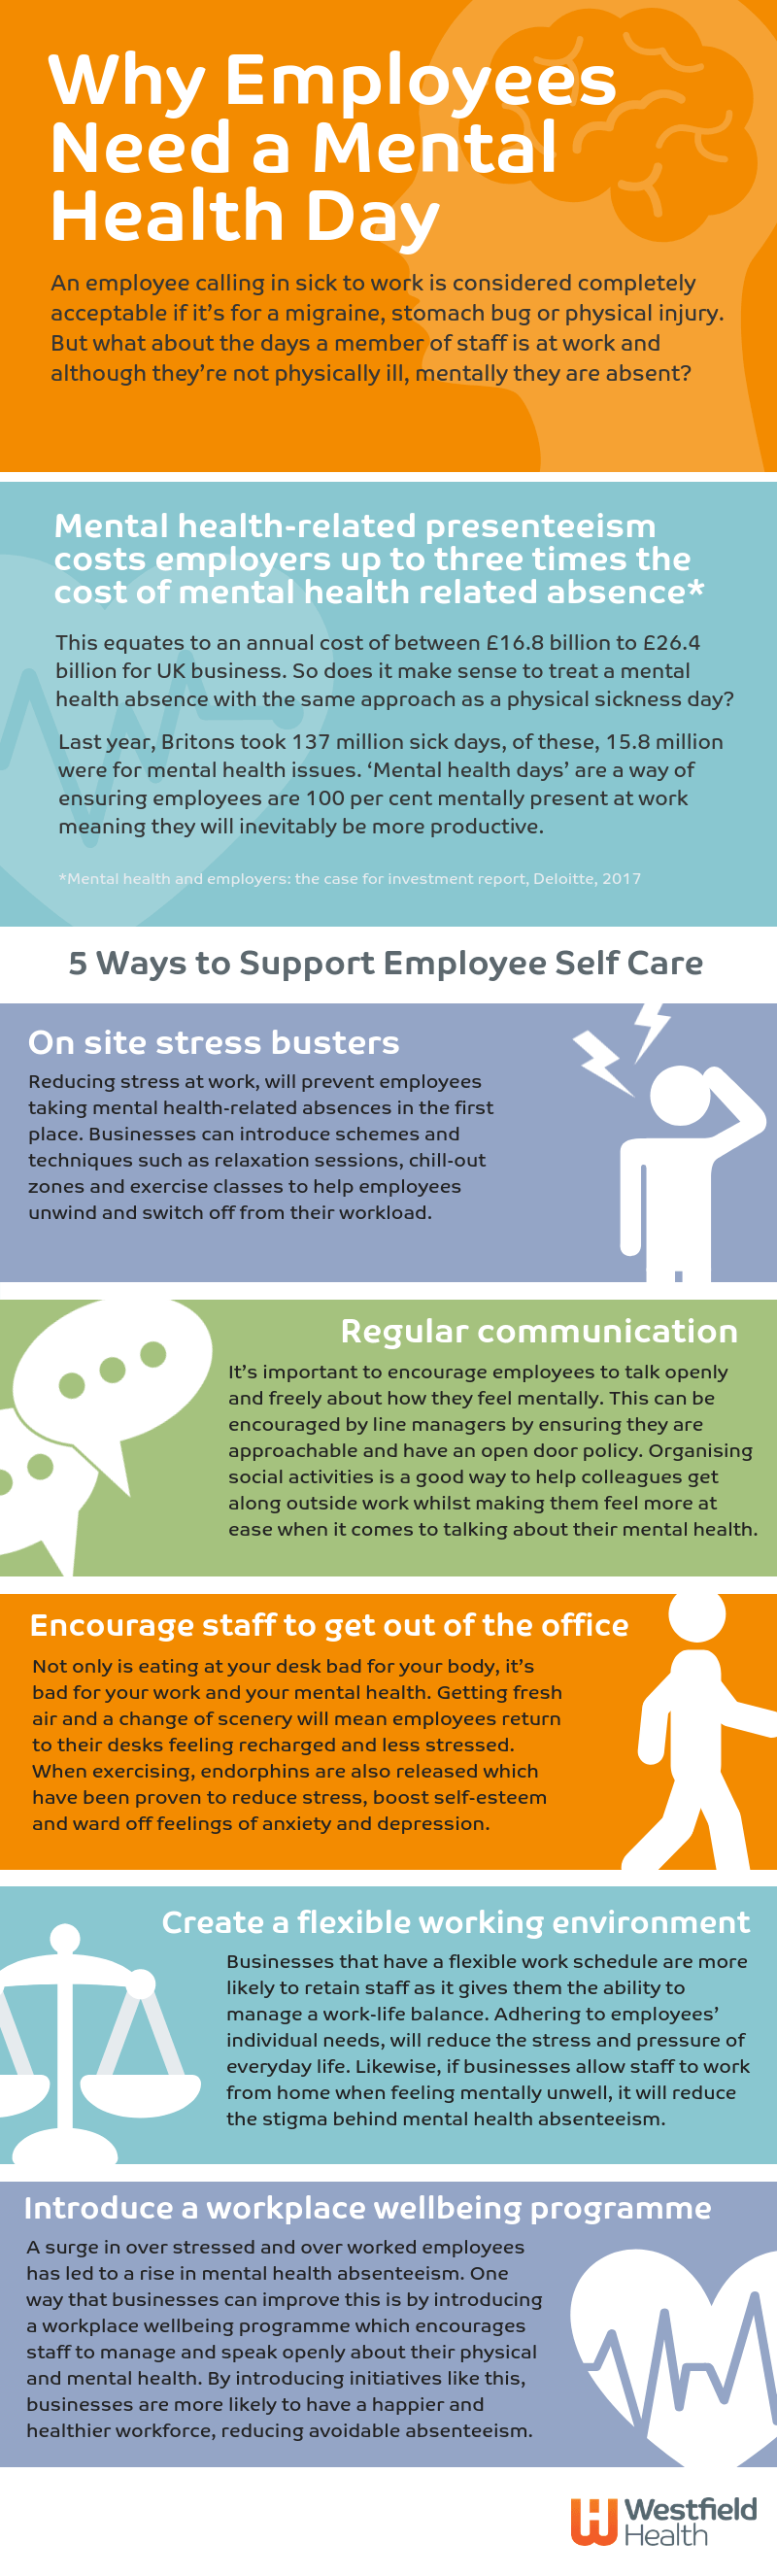 Why employees need a mental health day